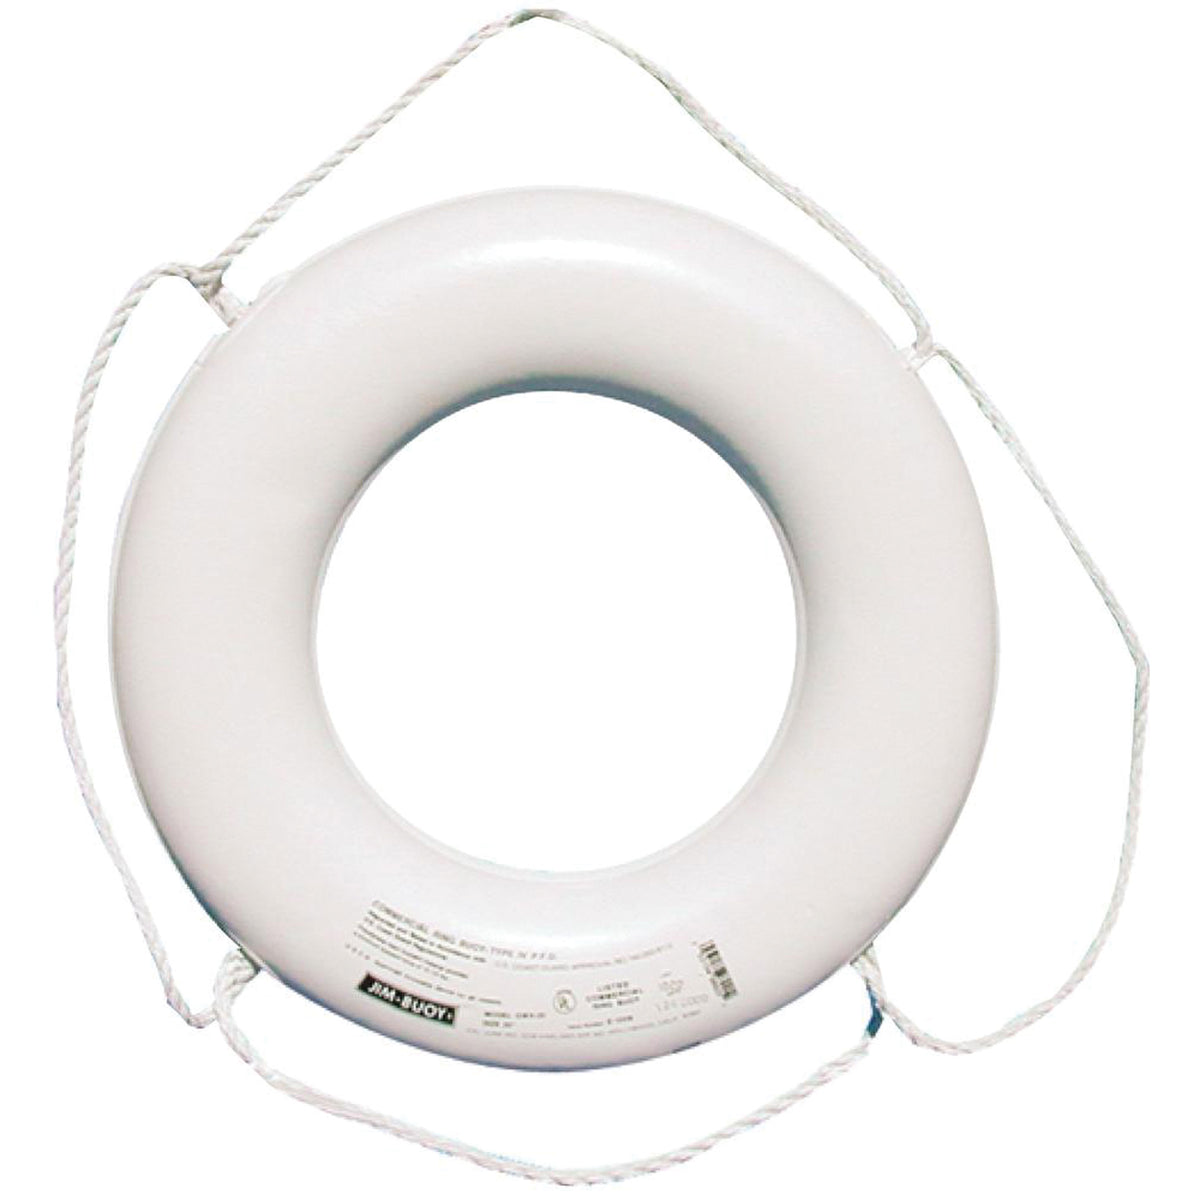 Jim-Buoy JBW-X-20 JBX-Series Life Ring without Beckets - 20", White